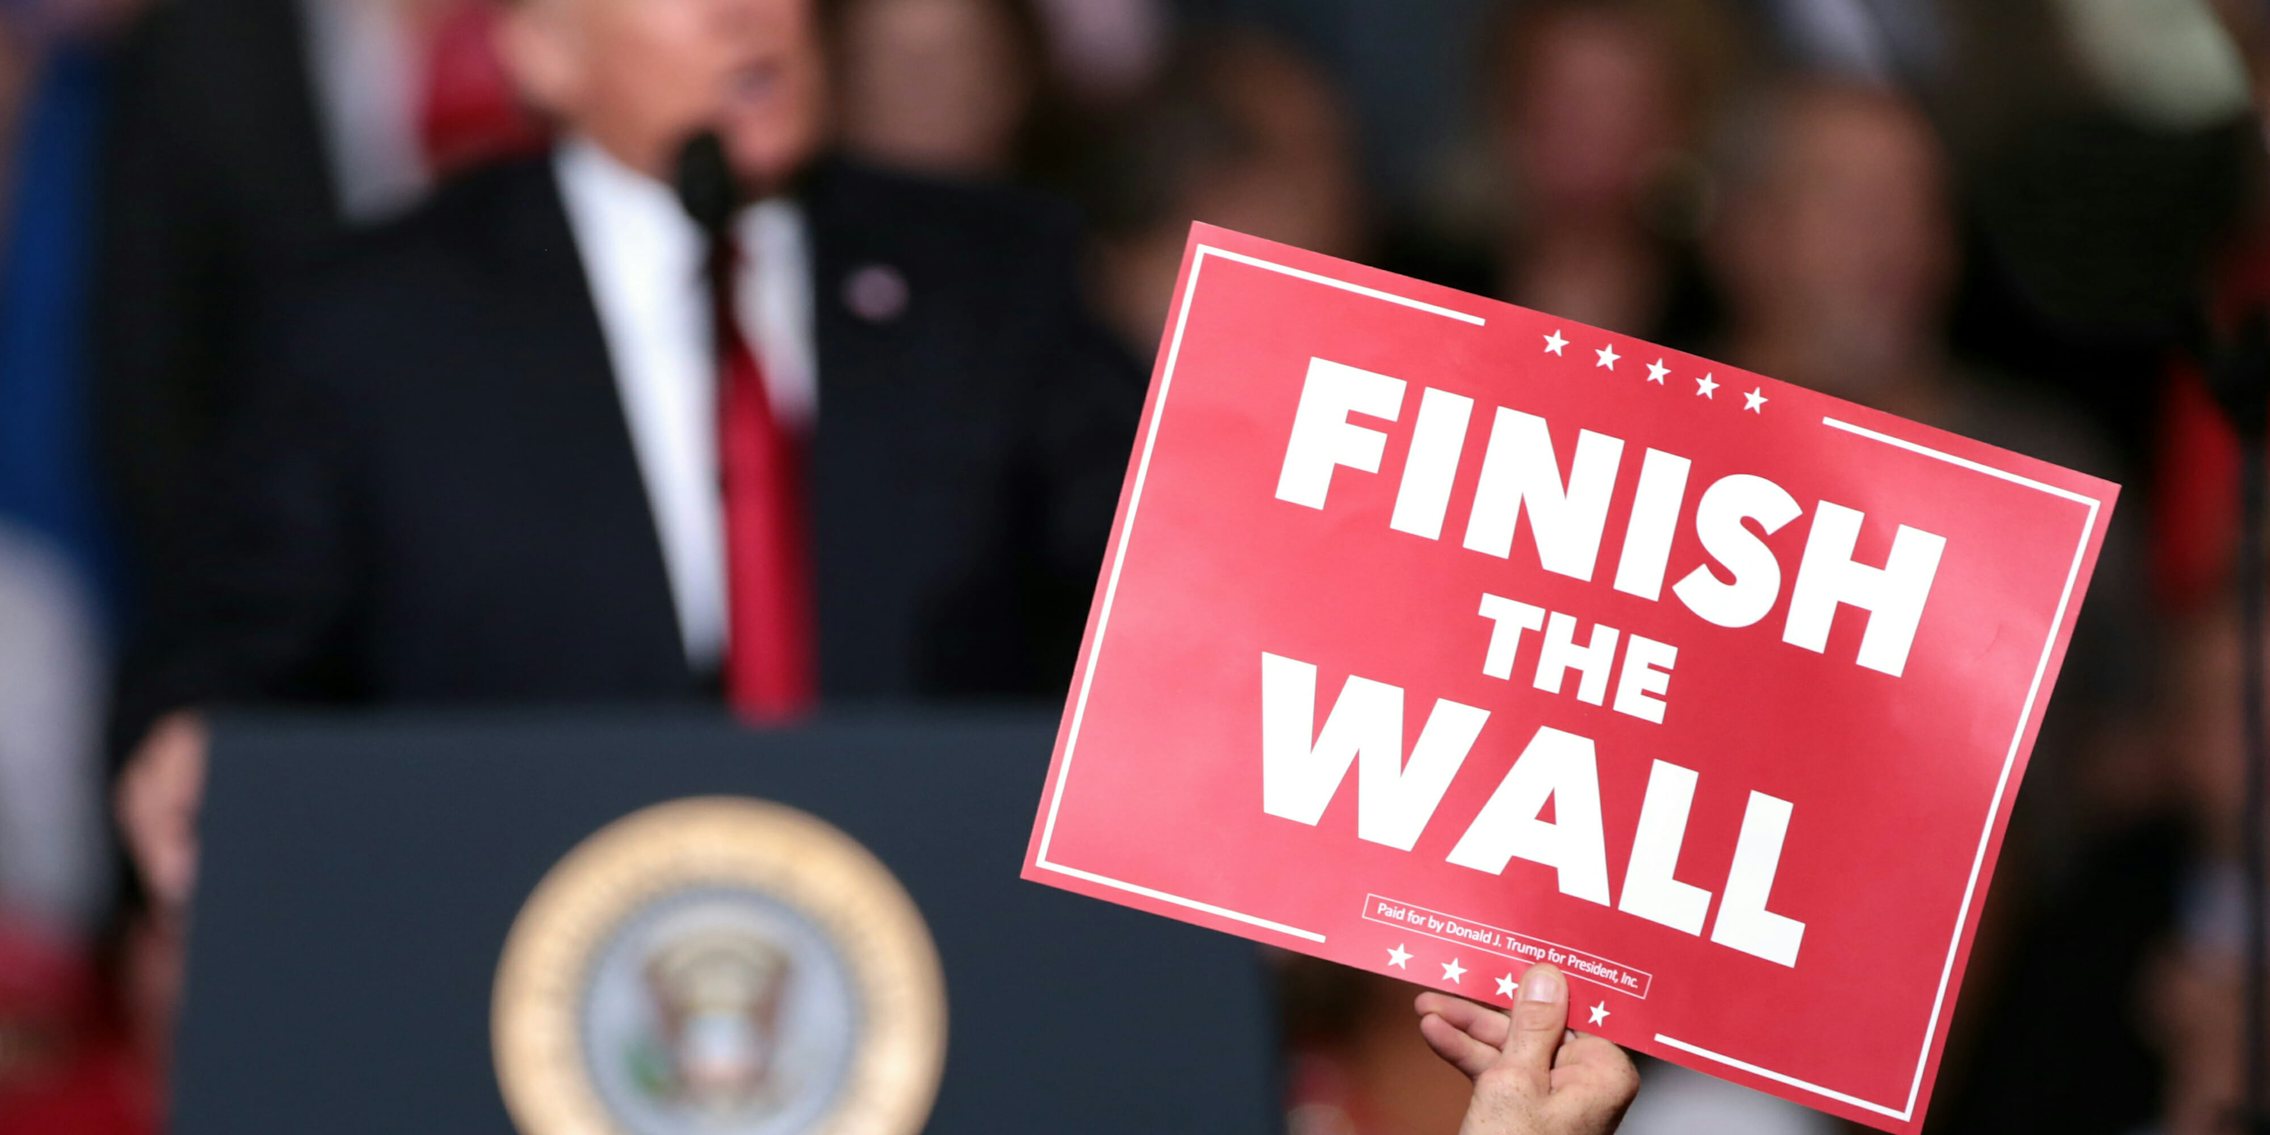 One GoFundMe to build Trump's wall is sparking controversy.